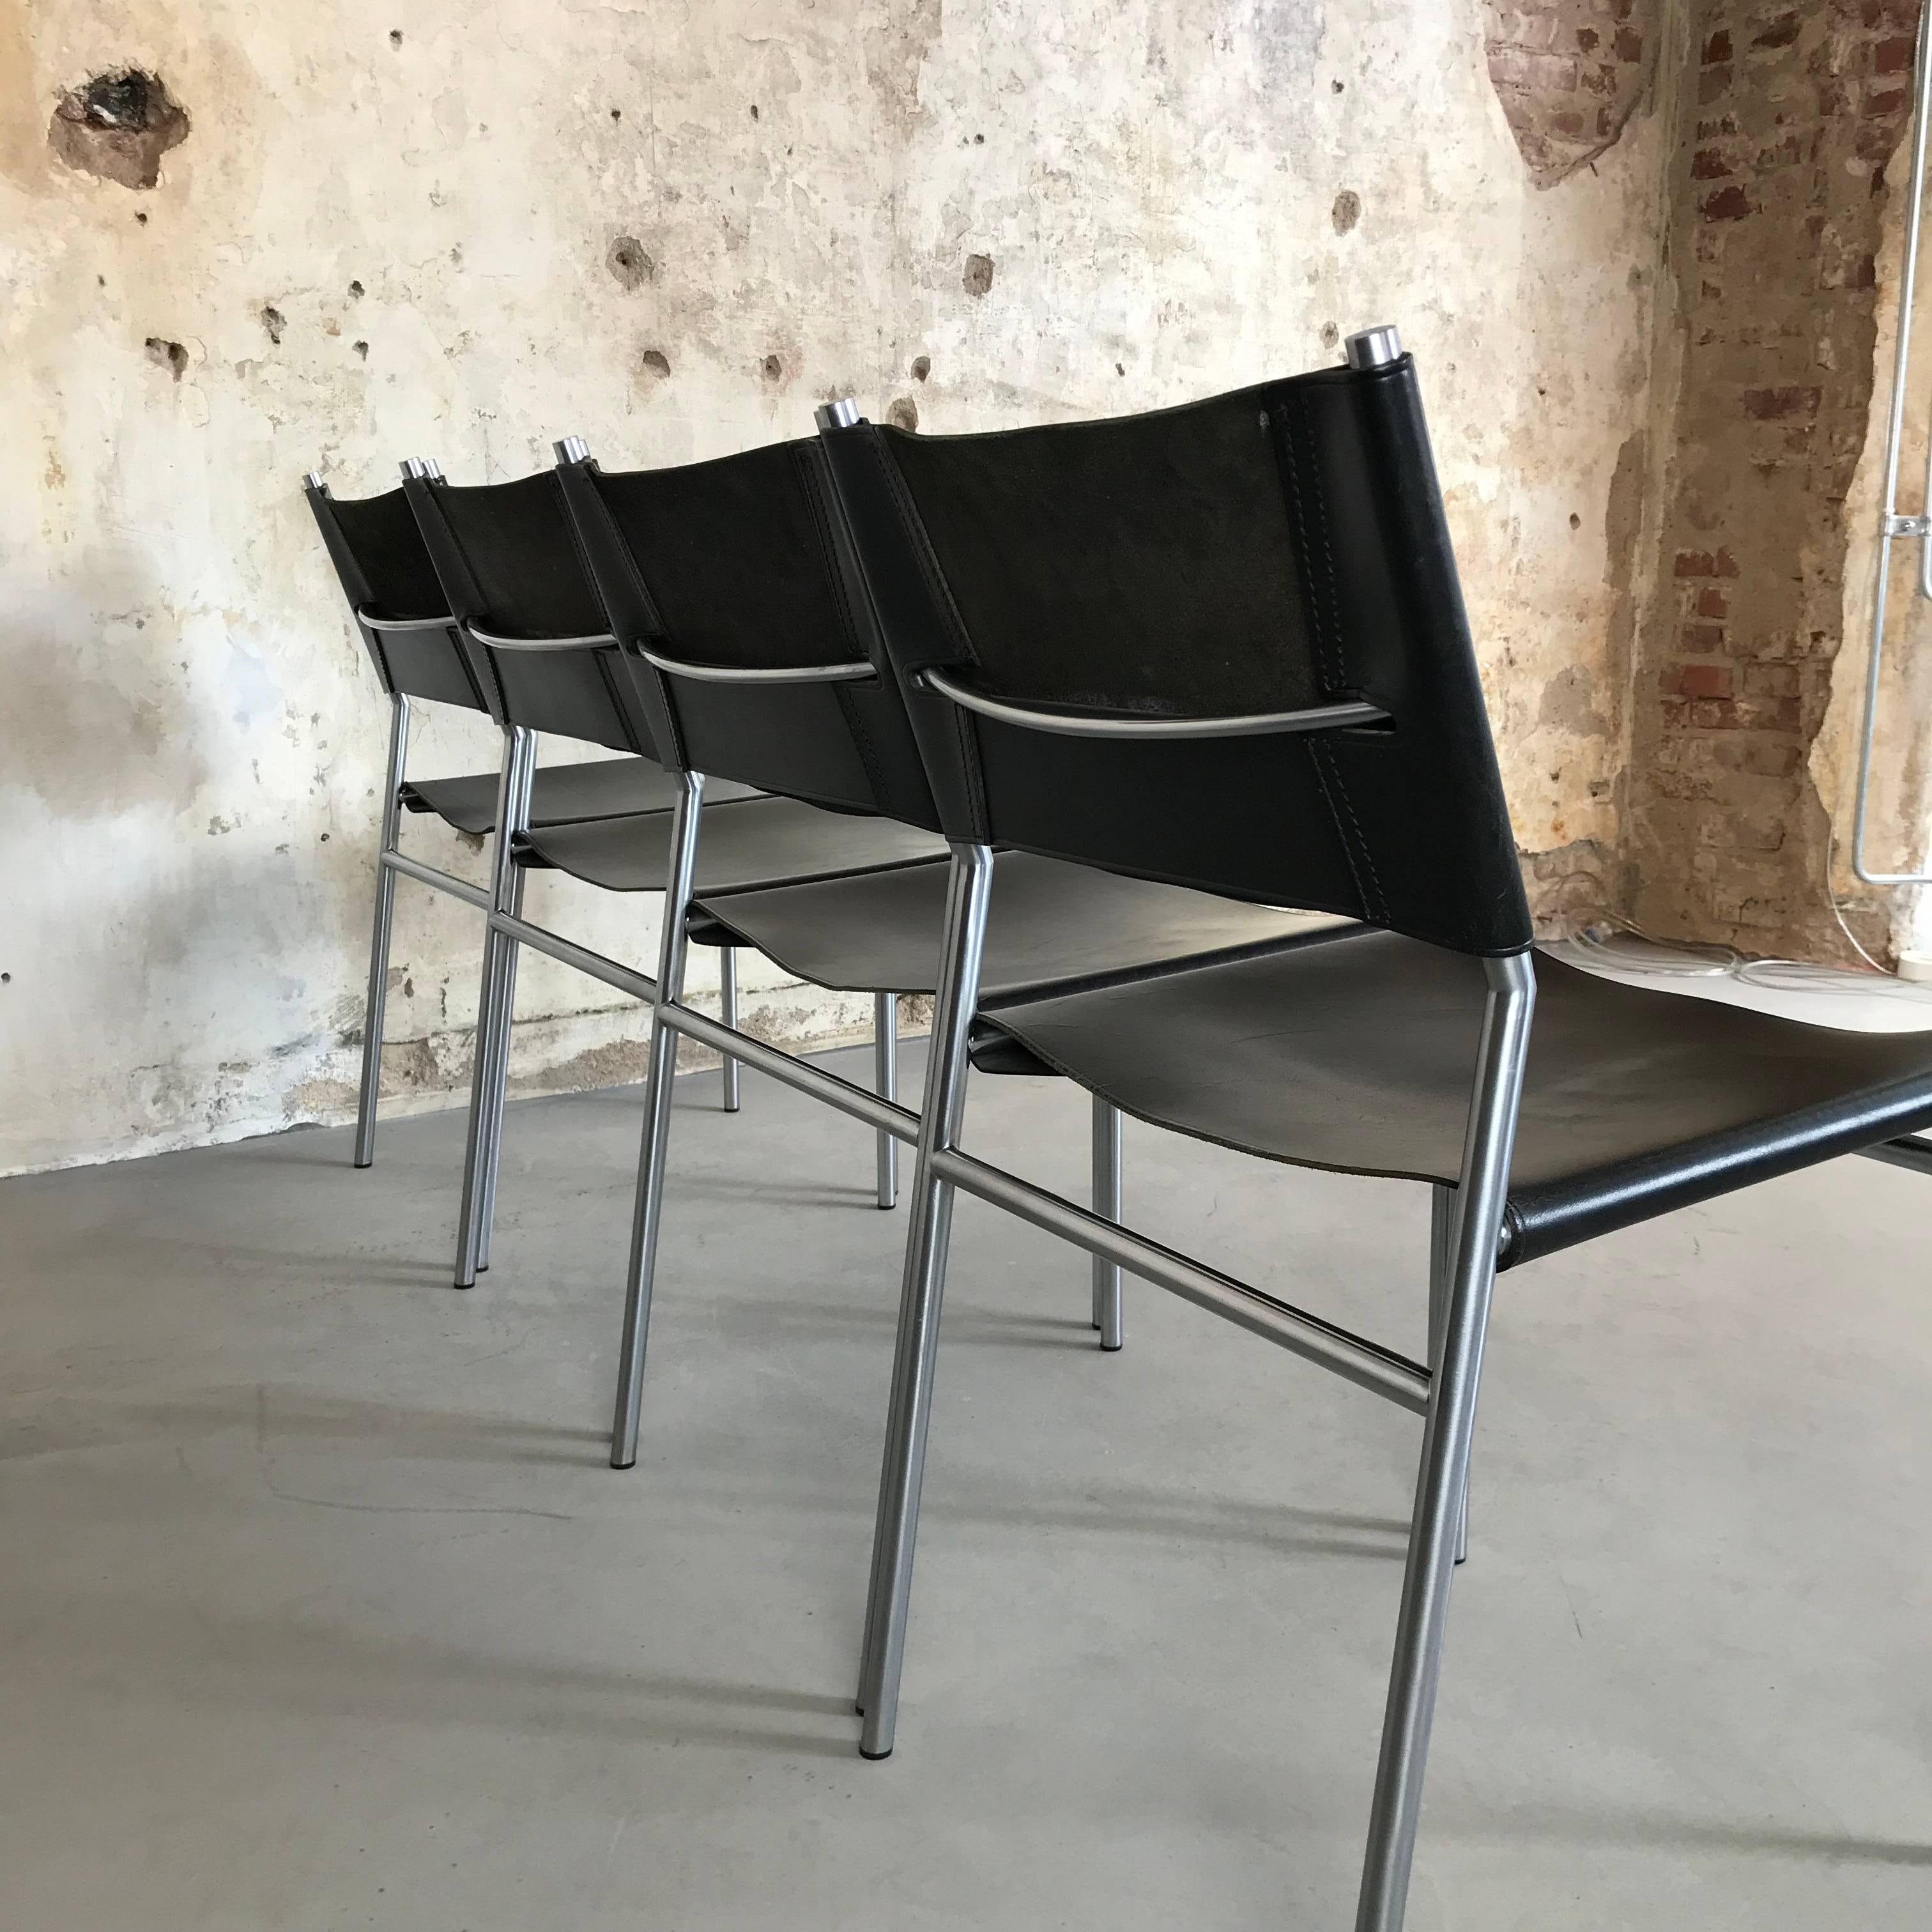 Mid-20th Century Set of Four Patinated Saddle Leather Chairs, SE06, Martin Visser for 't Spectrum